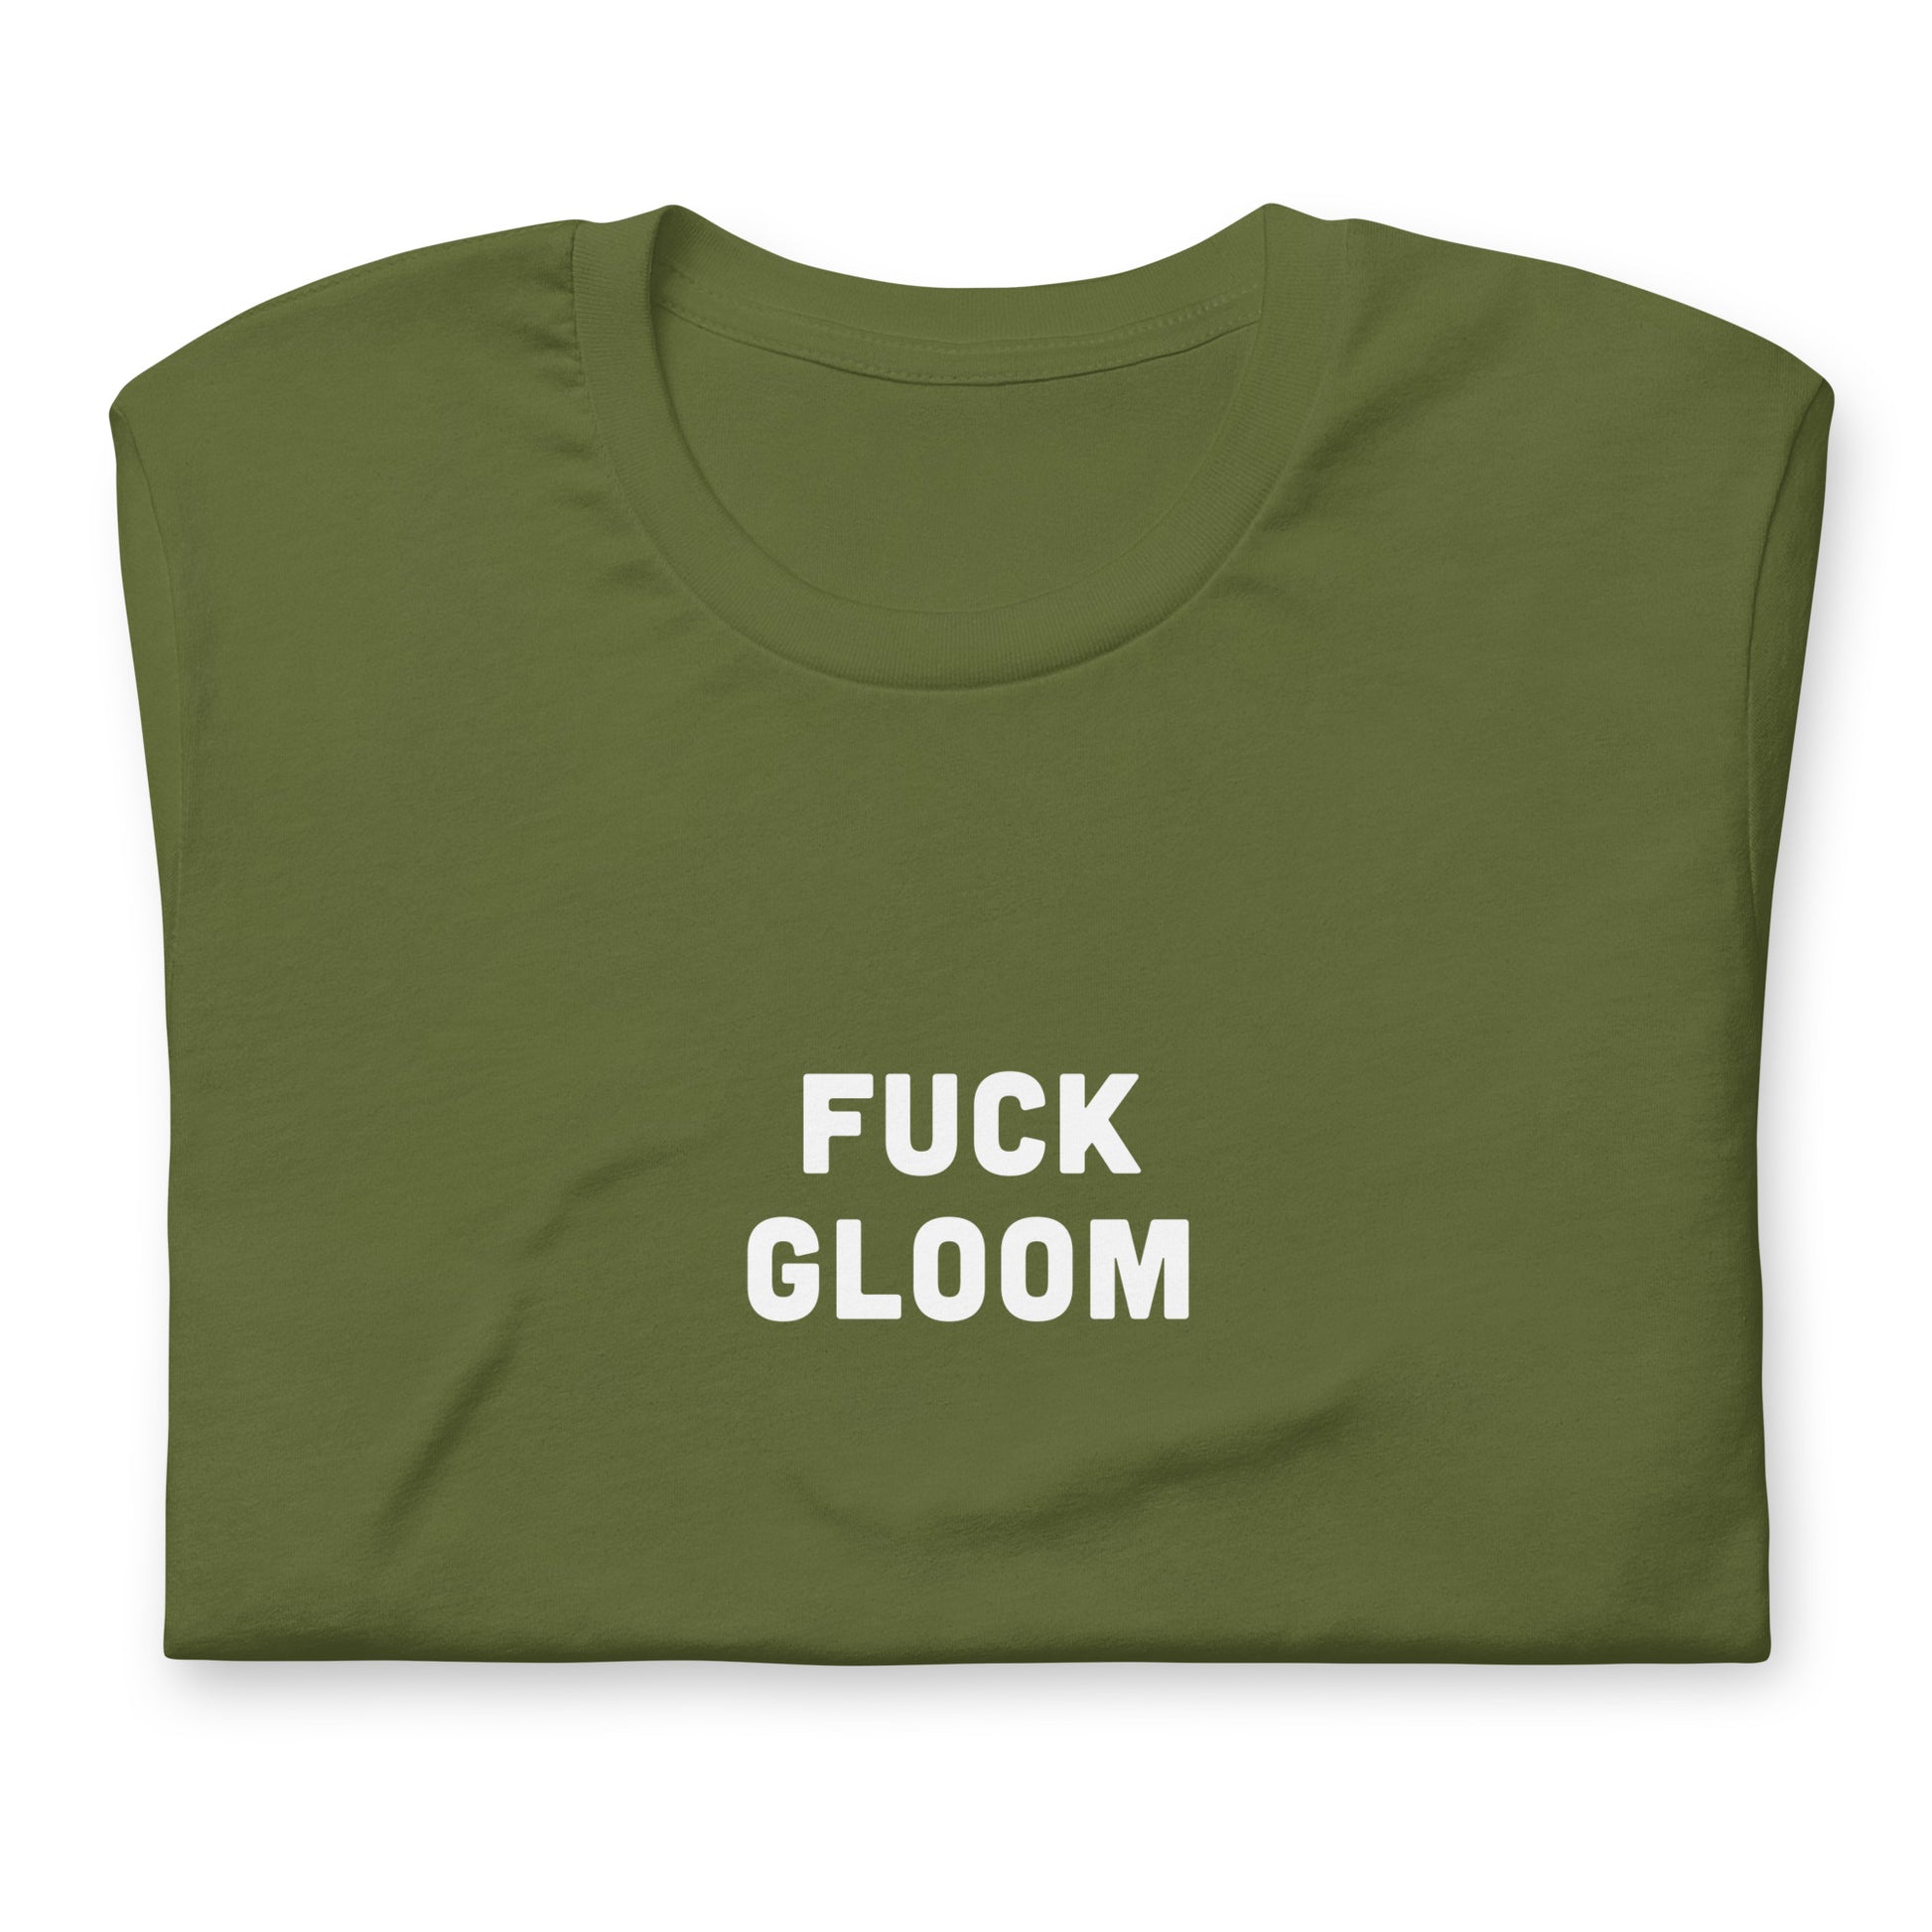 Fuck Gloom T-Shirt Size M Color Navy